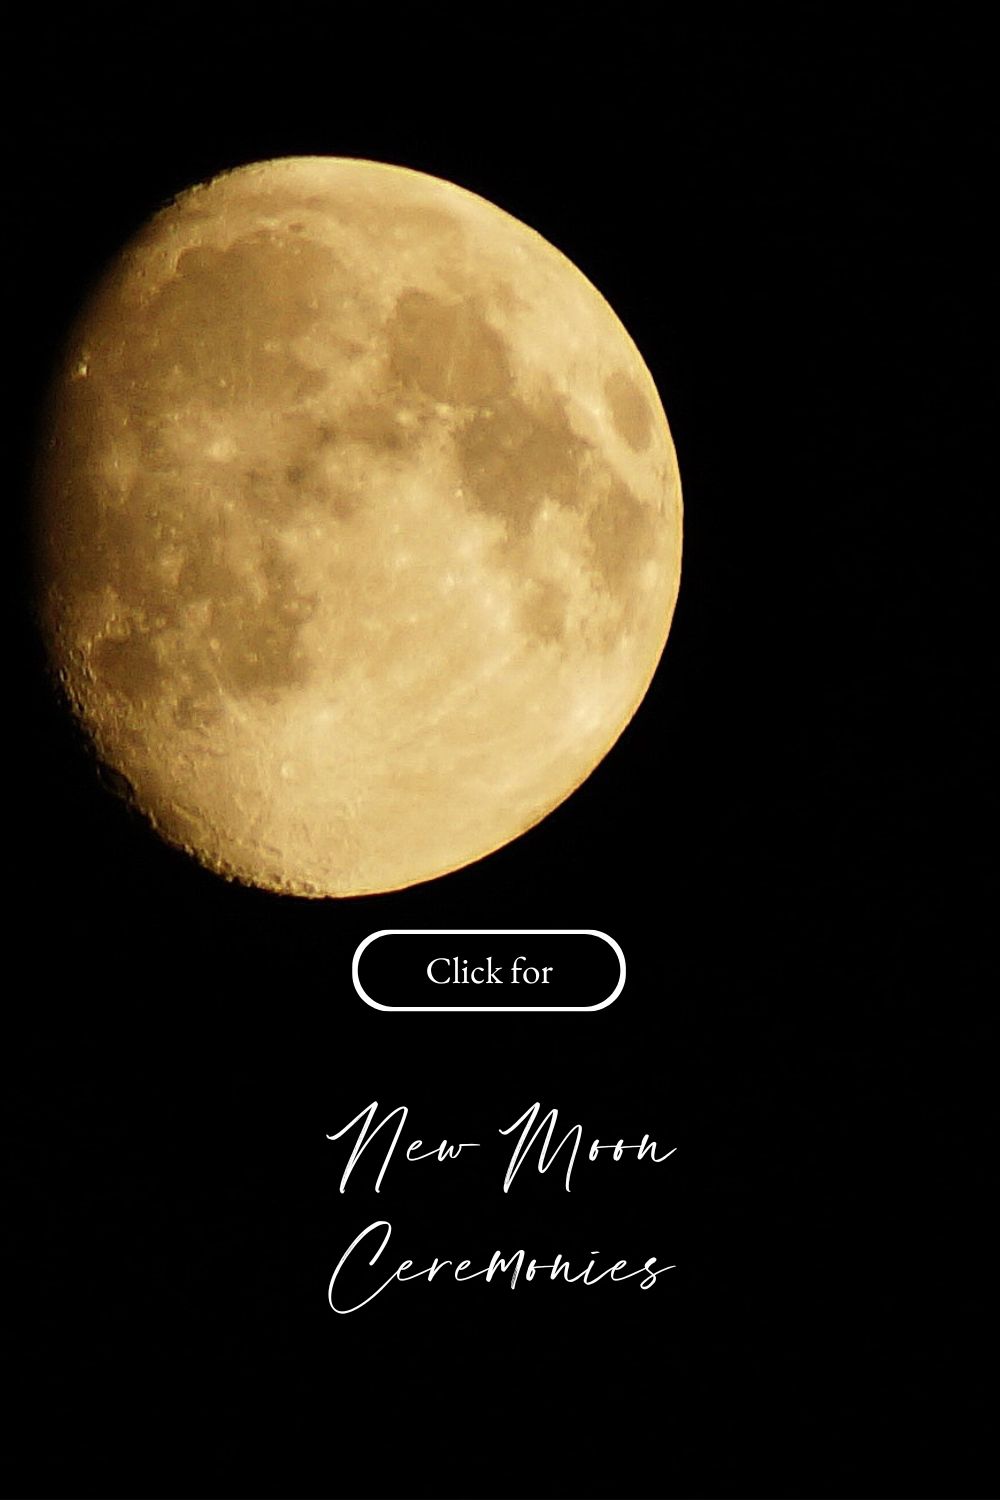 Click for New Moon Cacao Ceremonies (1)